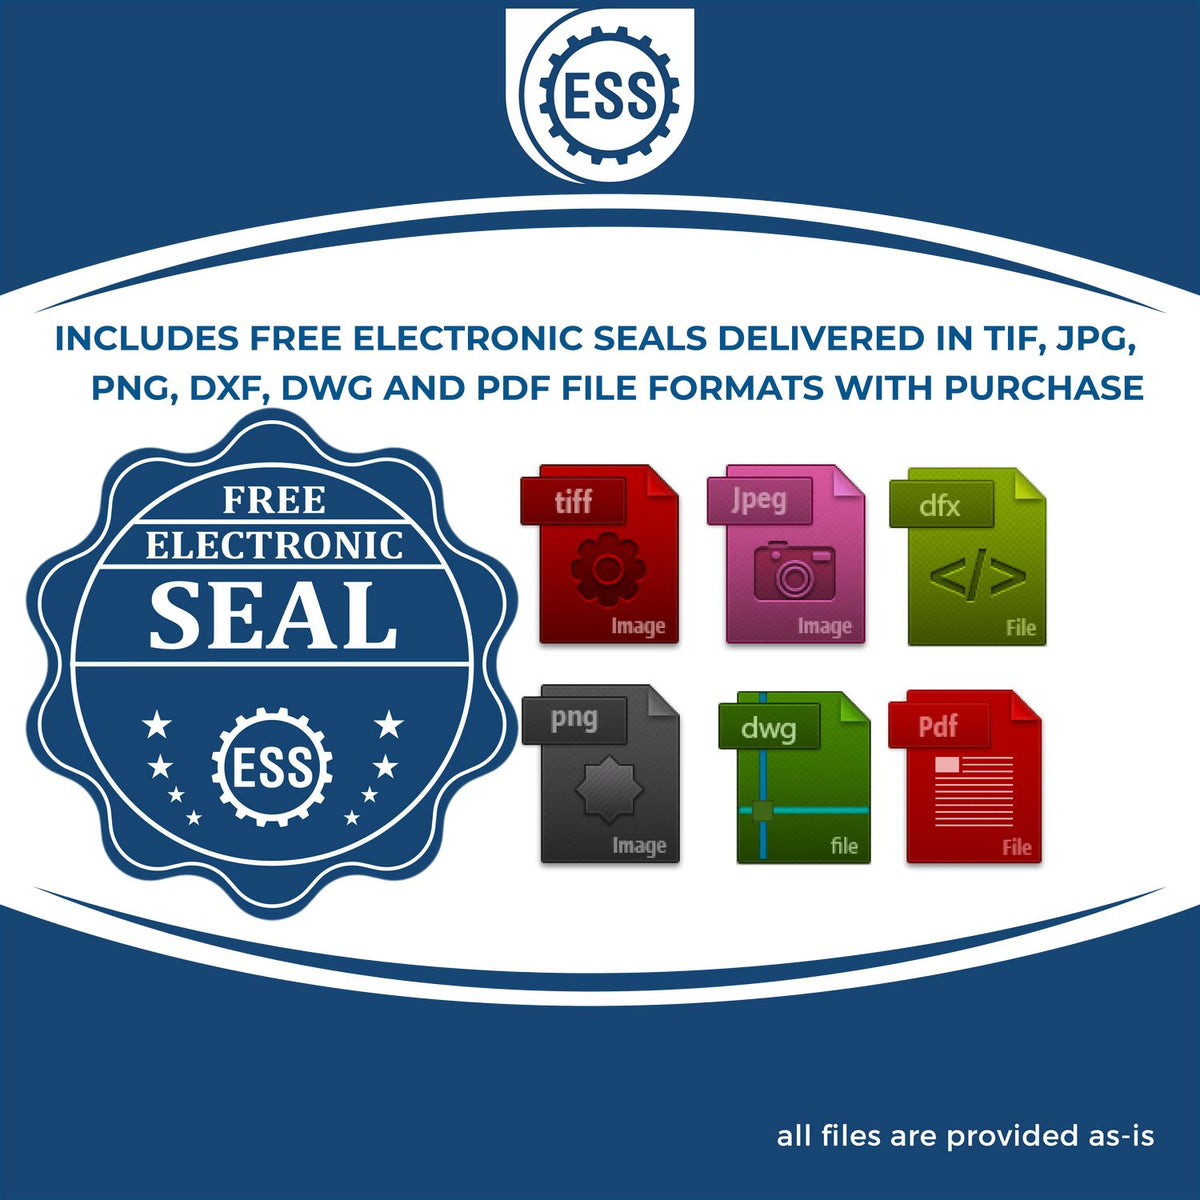 An infographic for the free electronic seal for the Self-Inking Massachusetts PE Stamp illustrating the different file type icons such as DXF, DWG, TIF, JPG and PNG.